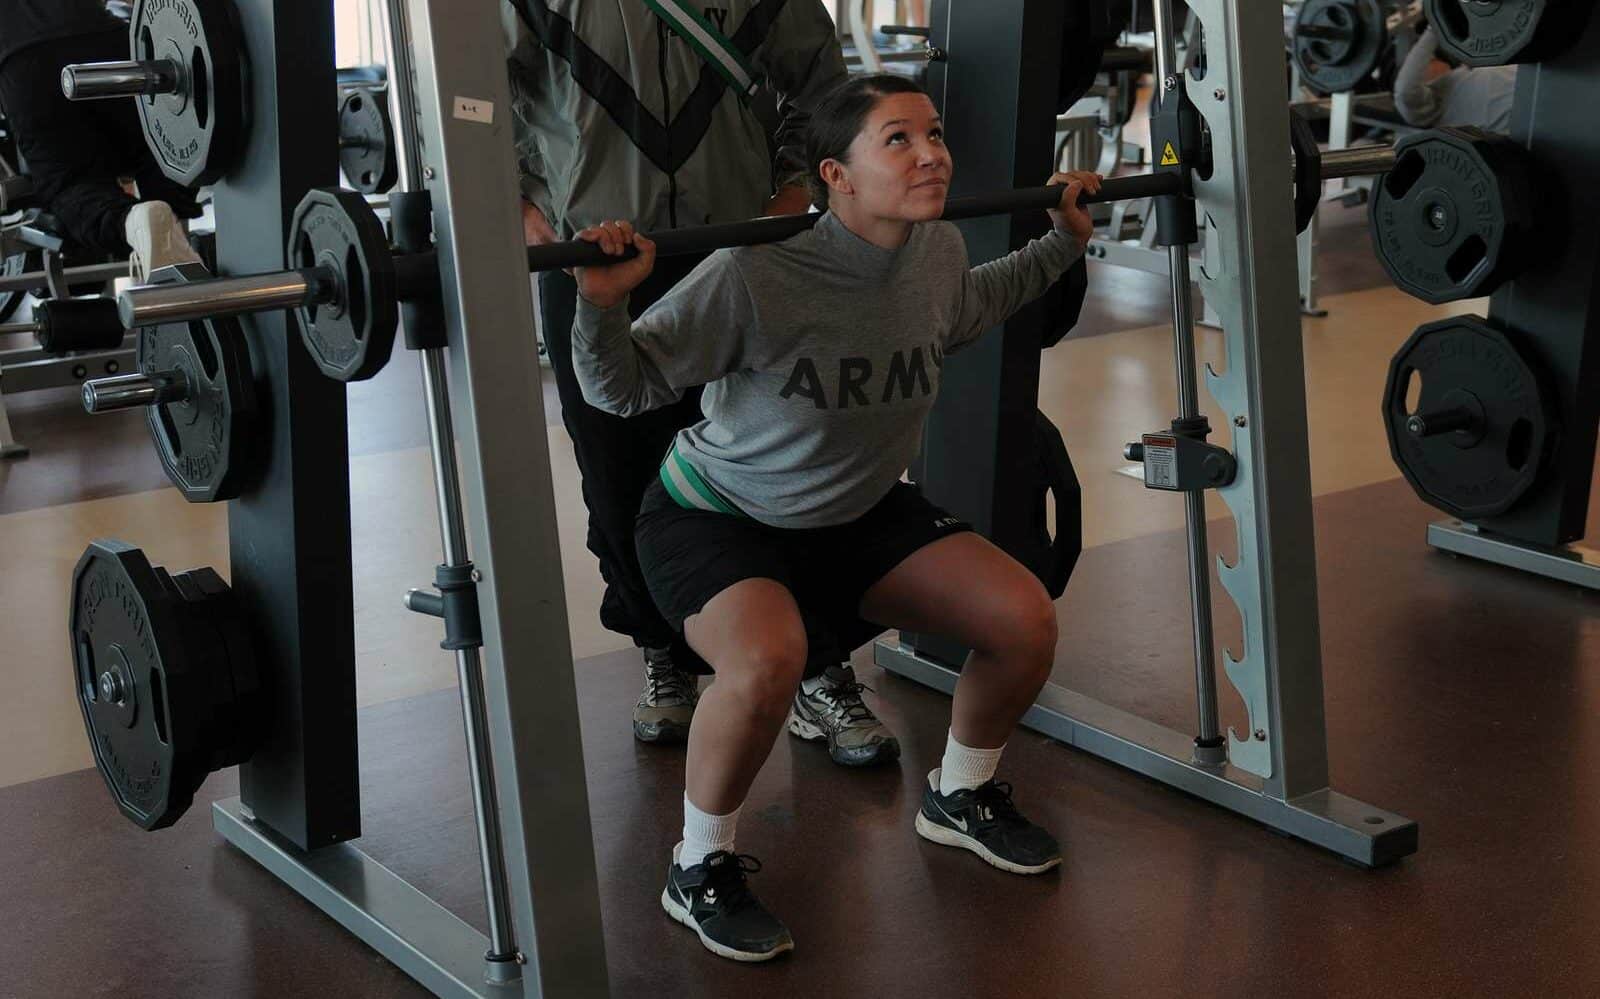 US Army Sgt. Melissa Schimmel performing using the smith machine for squats